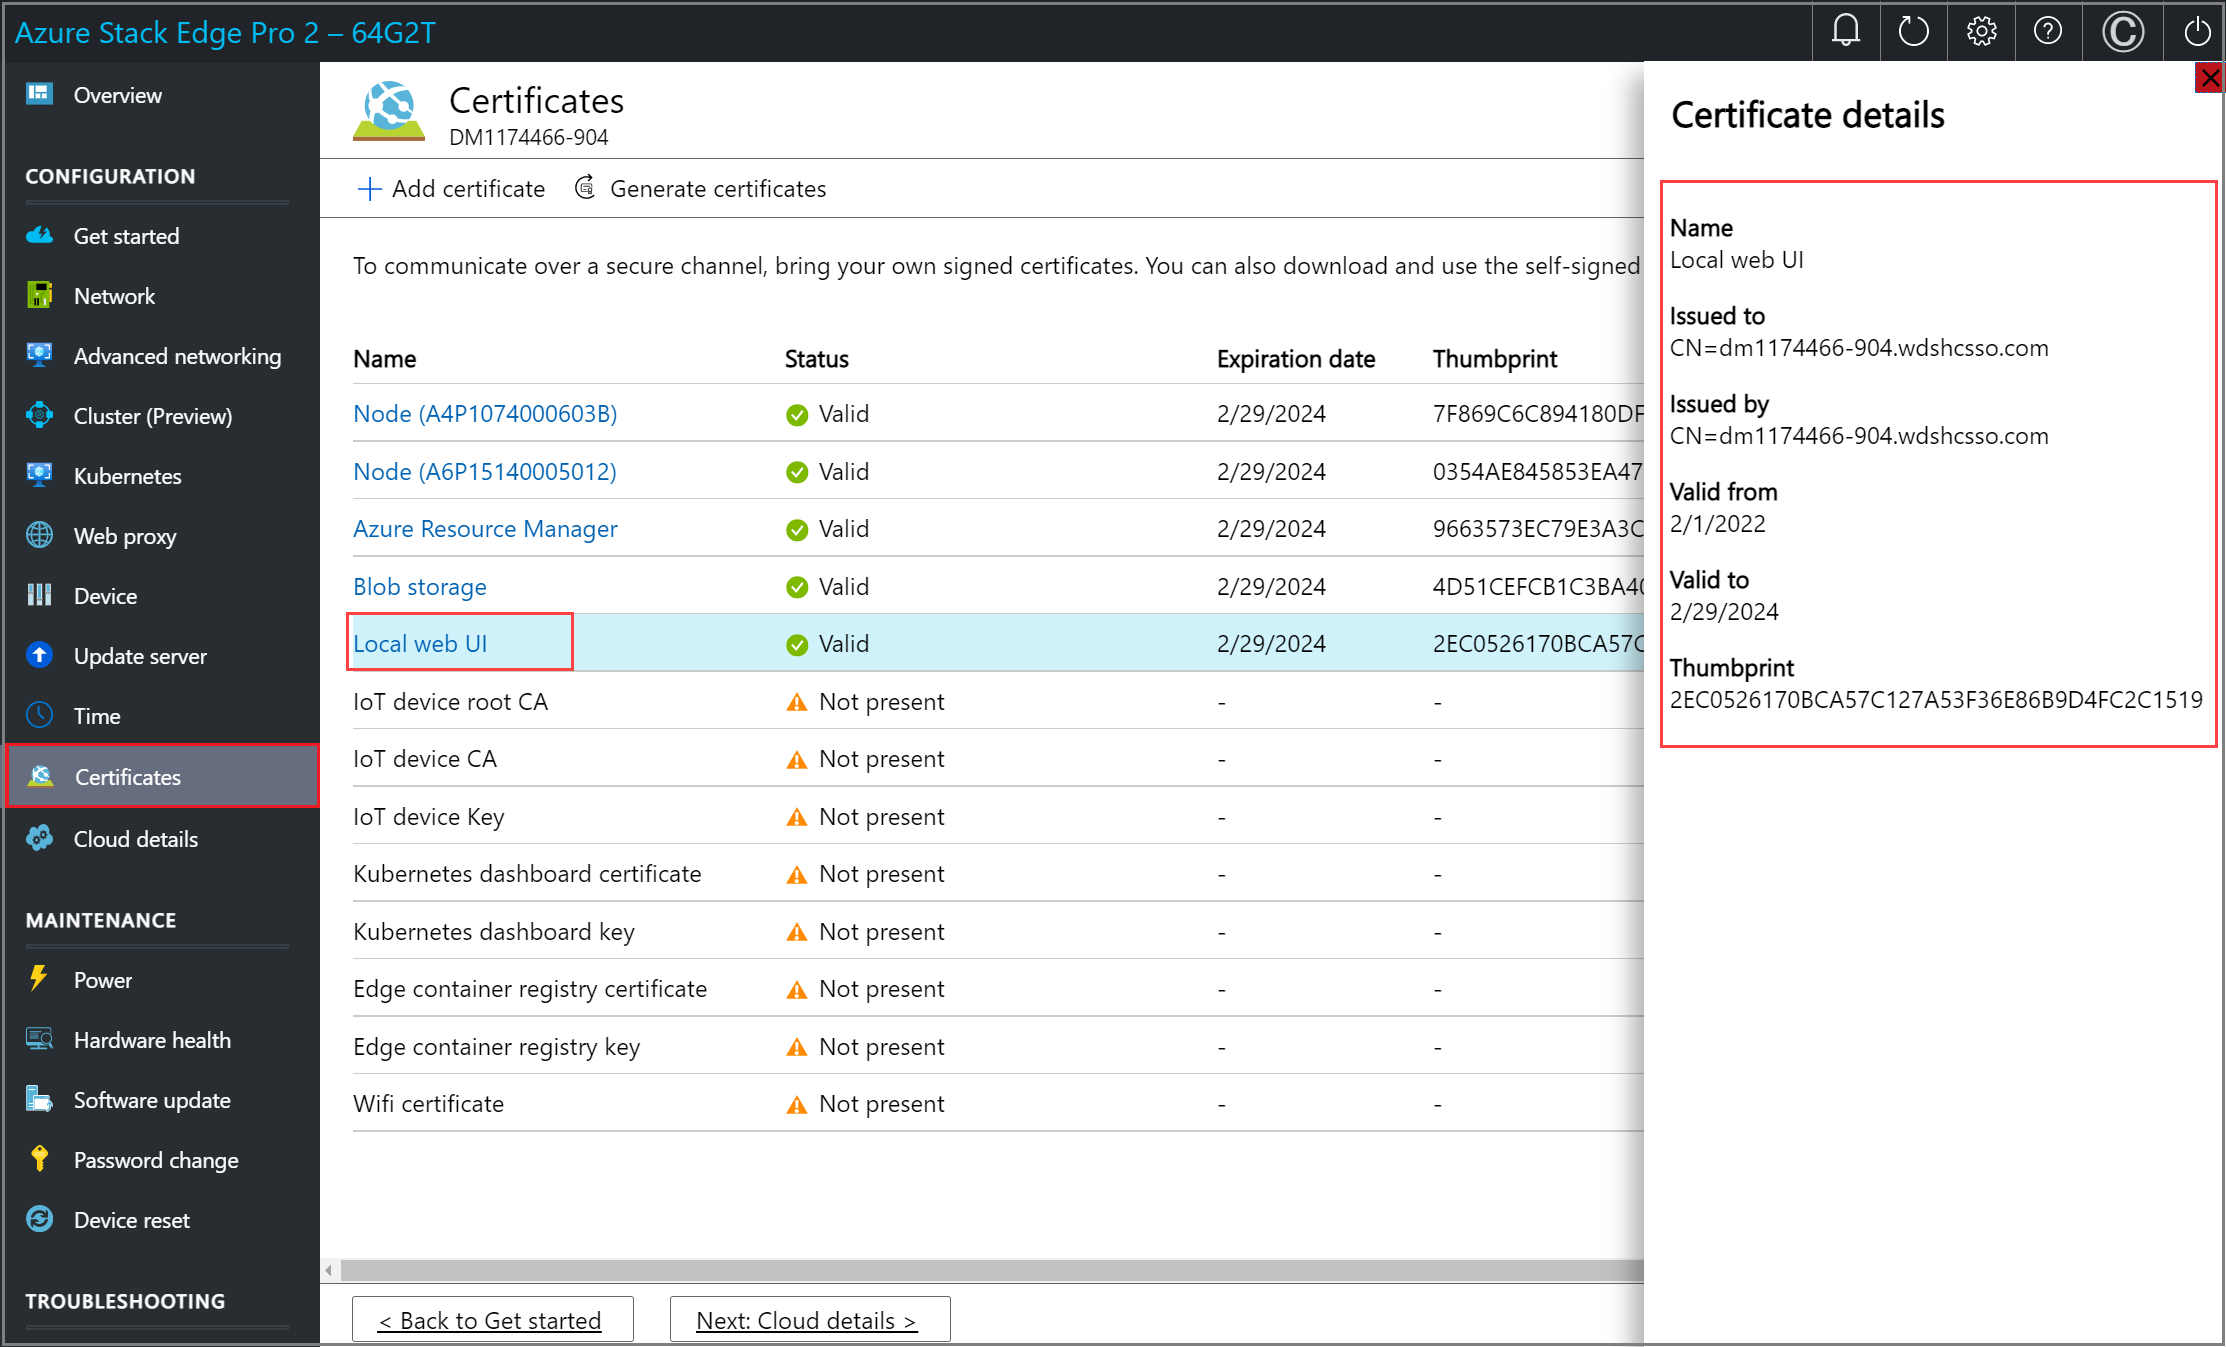 Screenshot of Local web UI certificate details highlighted on the Certificates page of an Azure Stack Edge device.